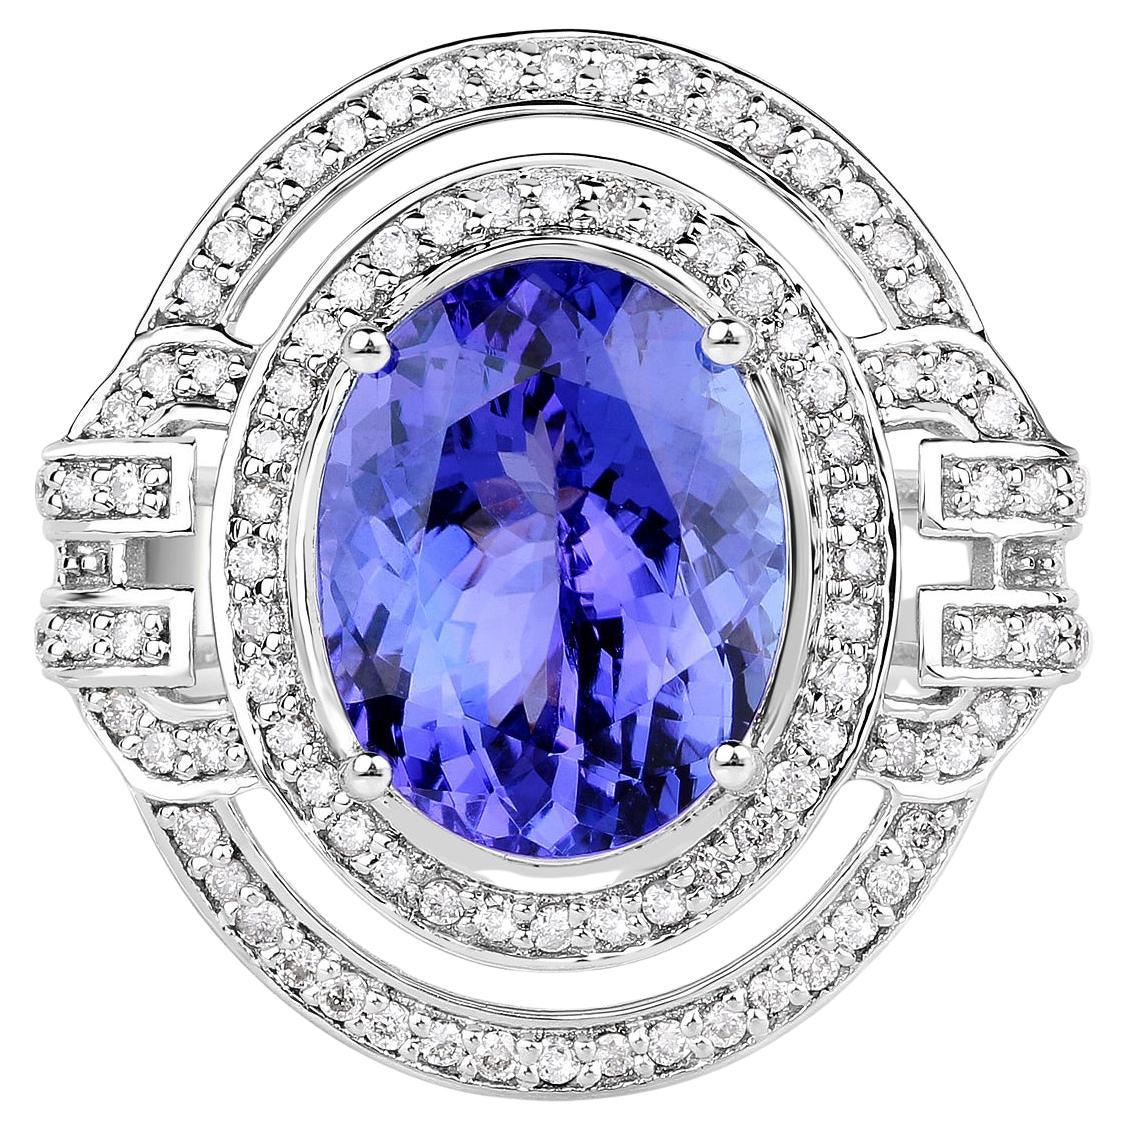 Tanzanite Ring With Diamonds 6.83 Carats 14K White Gold For Sale